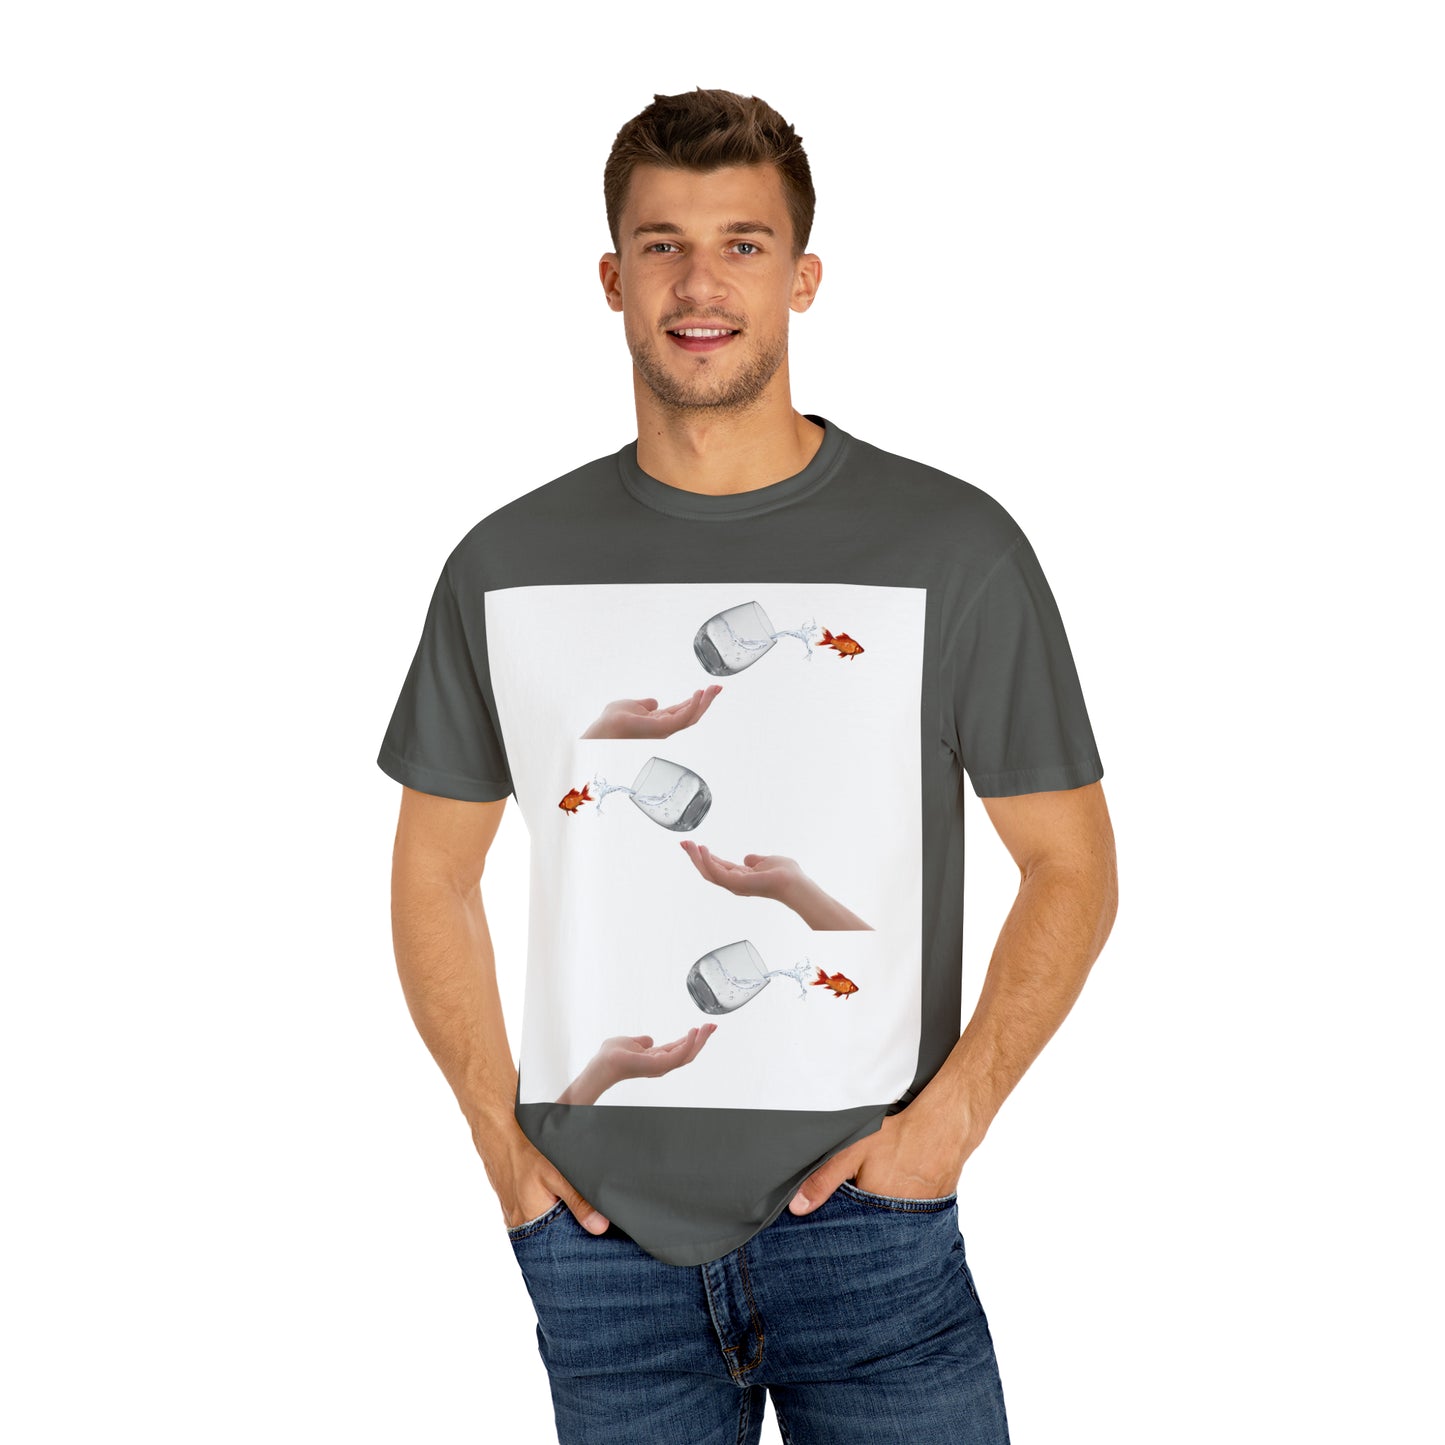 Don't feel like a fish out of water T-Shirt